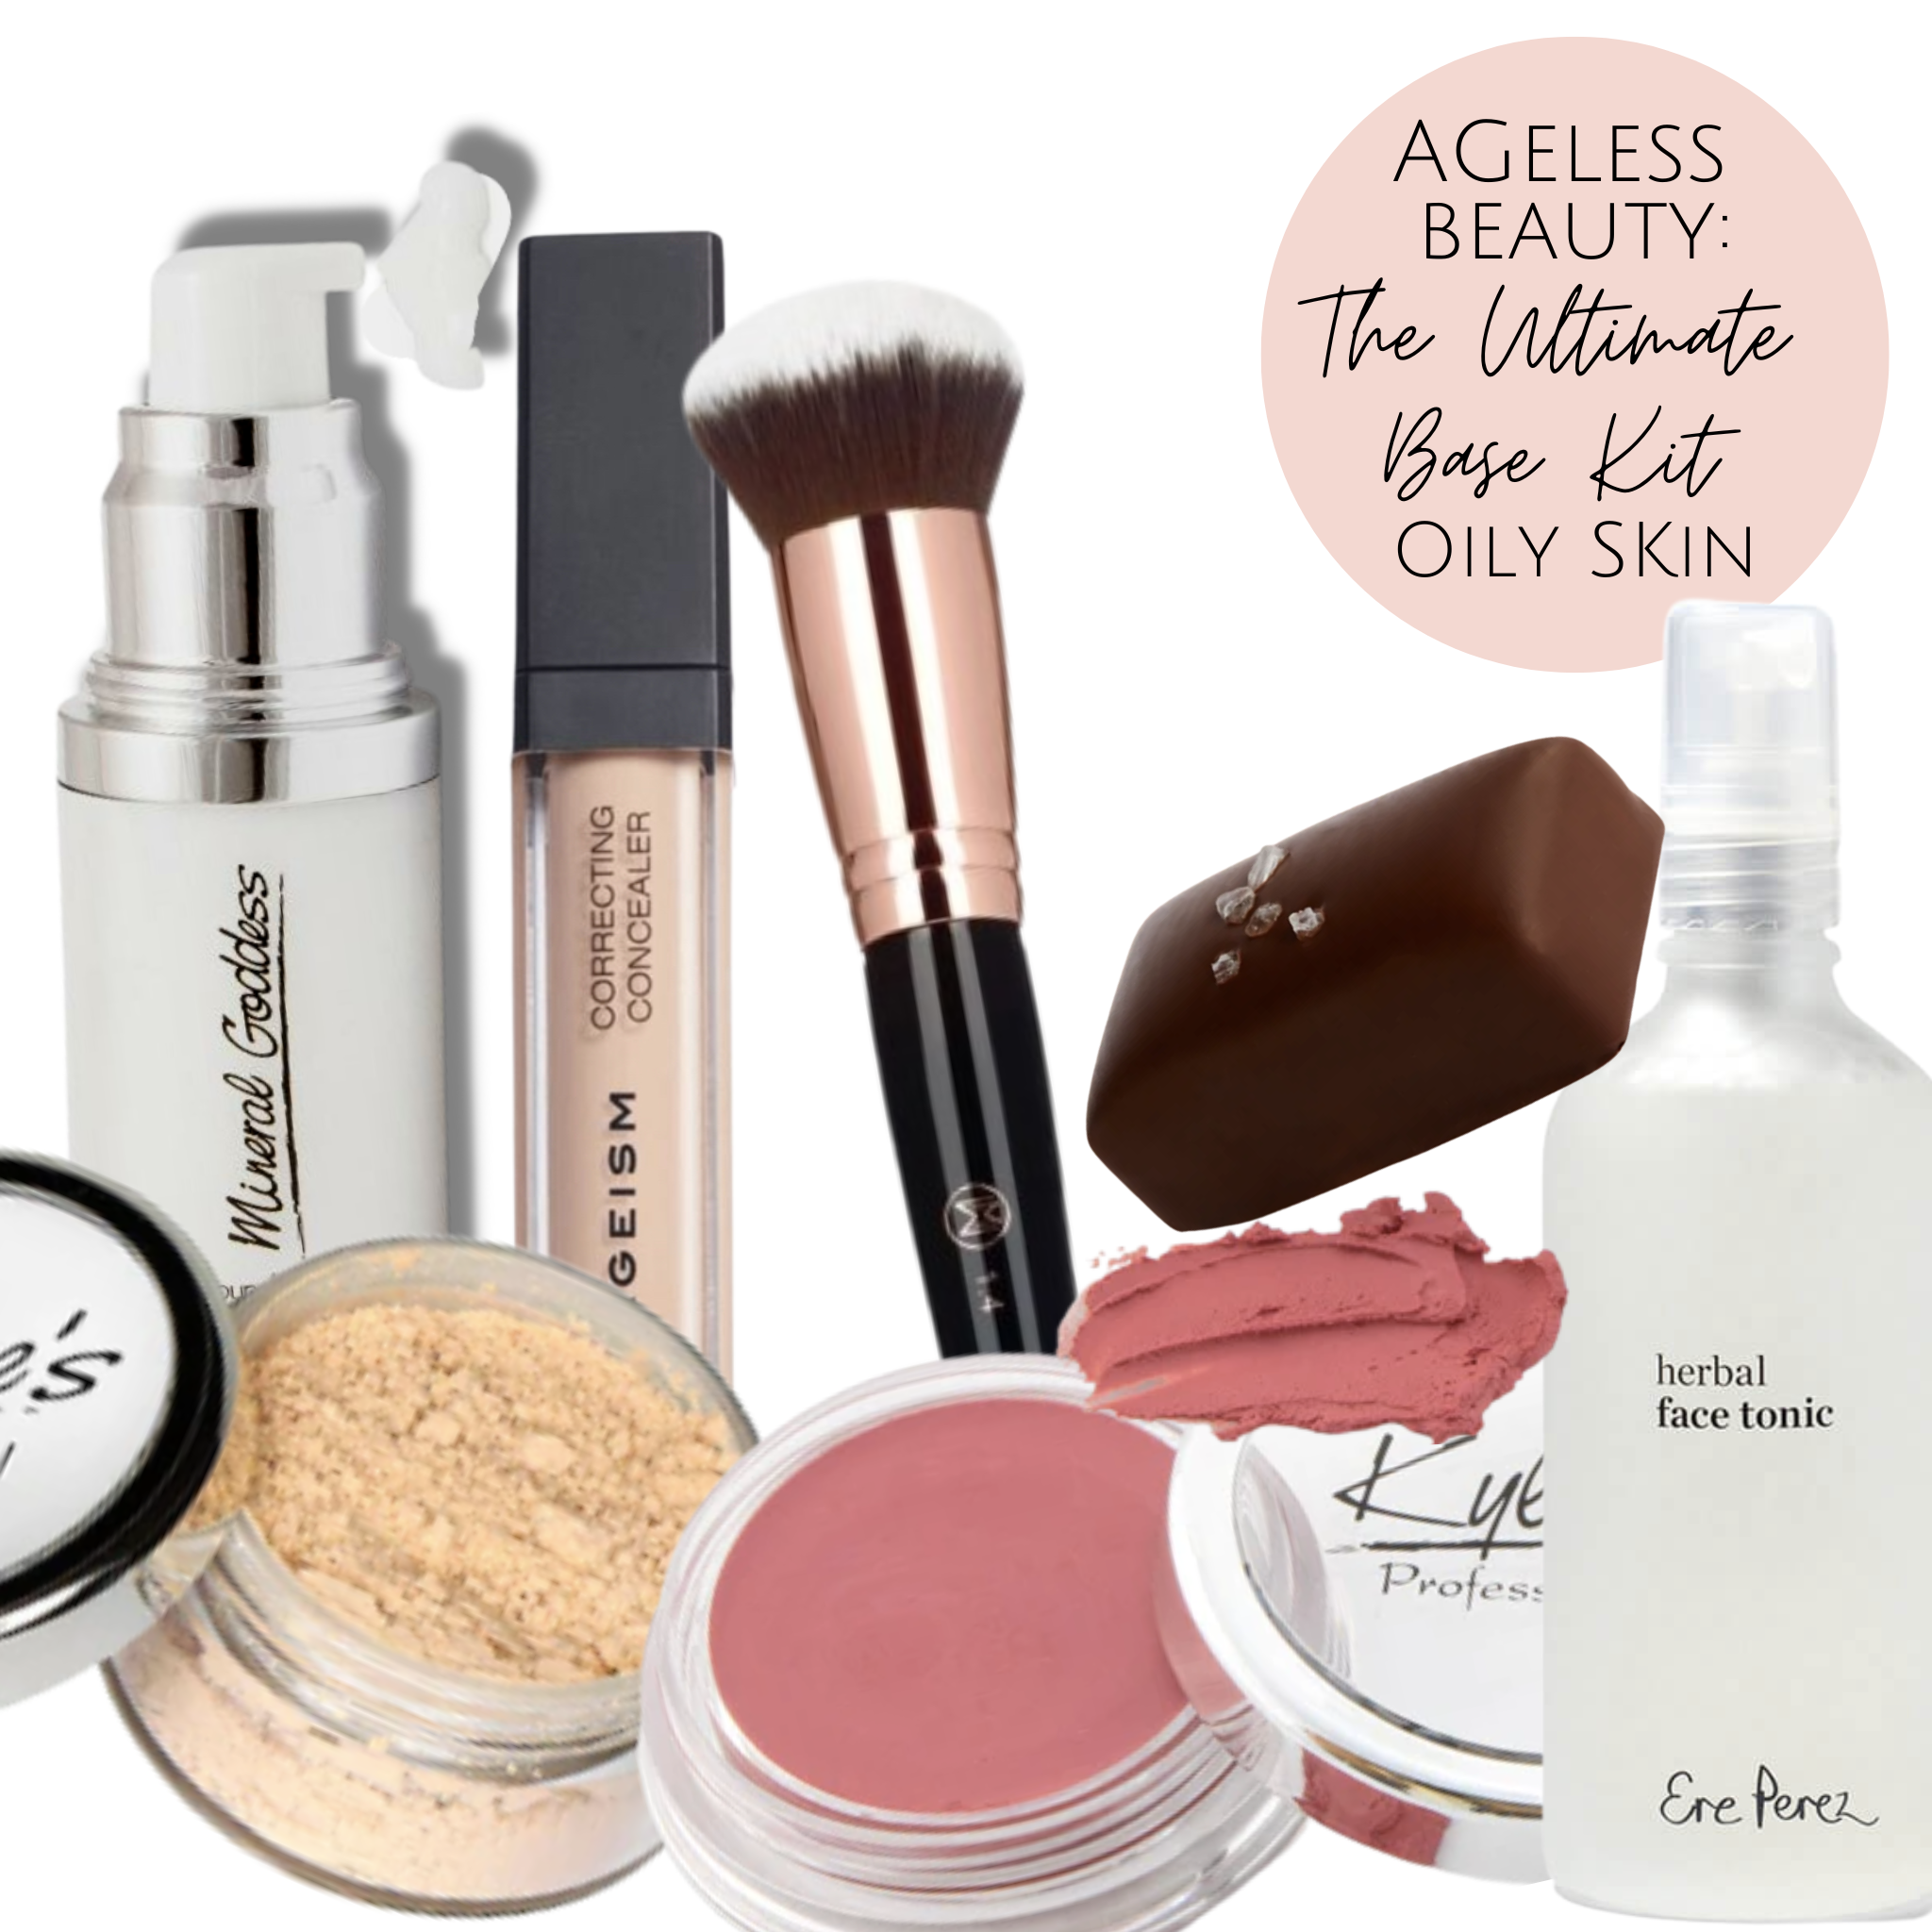 The Ultimate Base Kit for Oily Skin